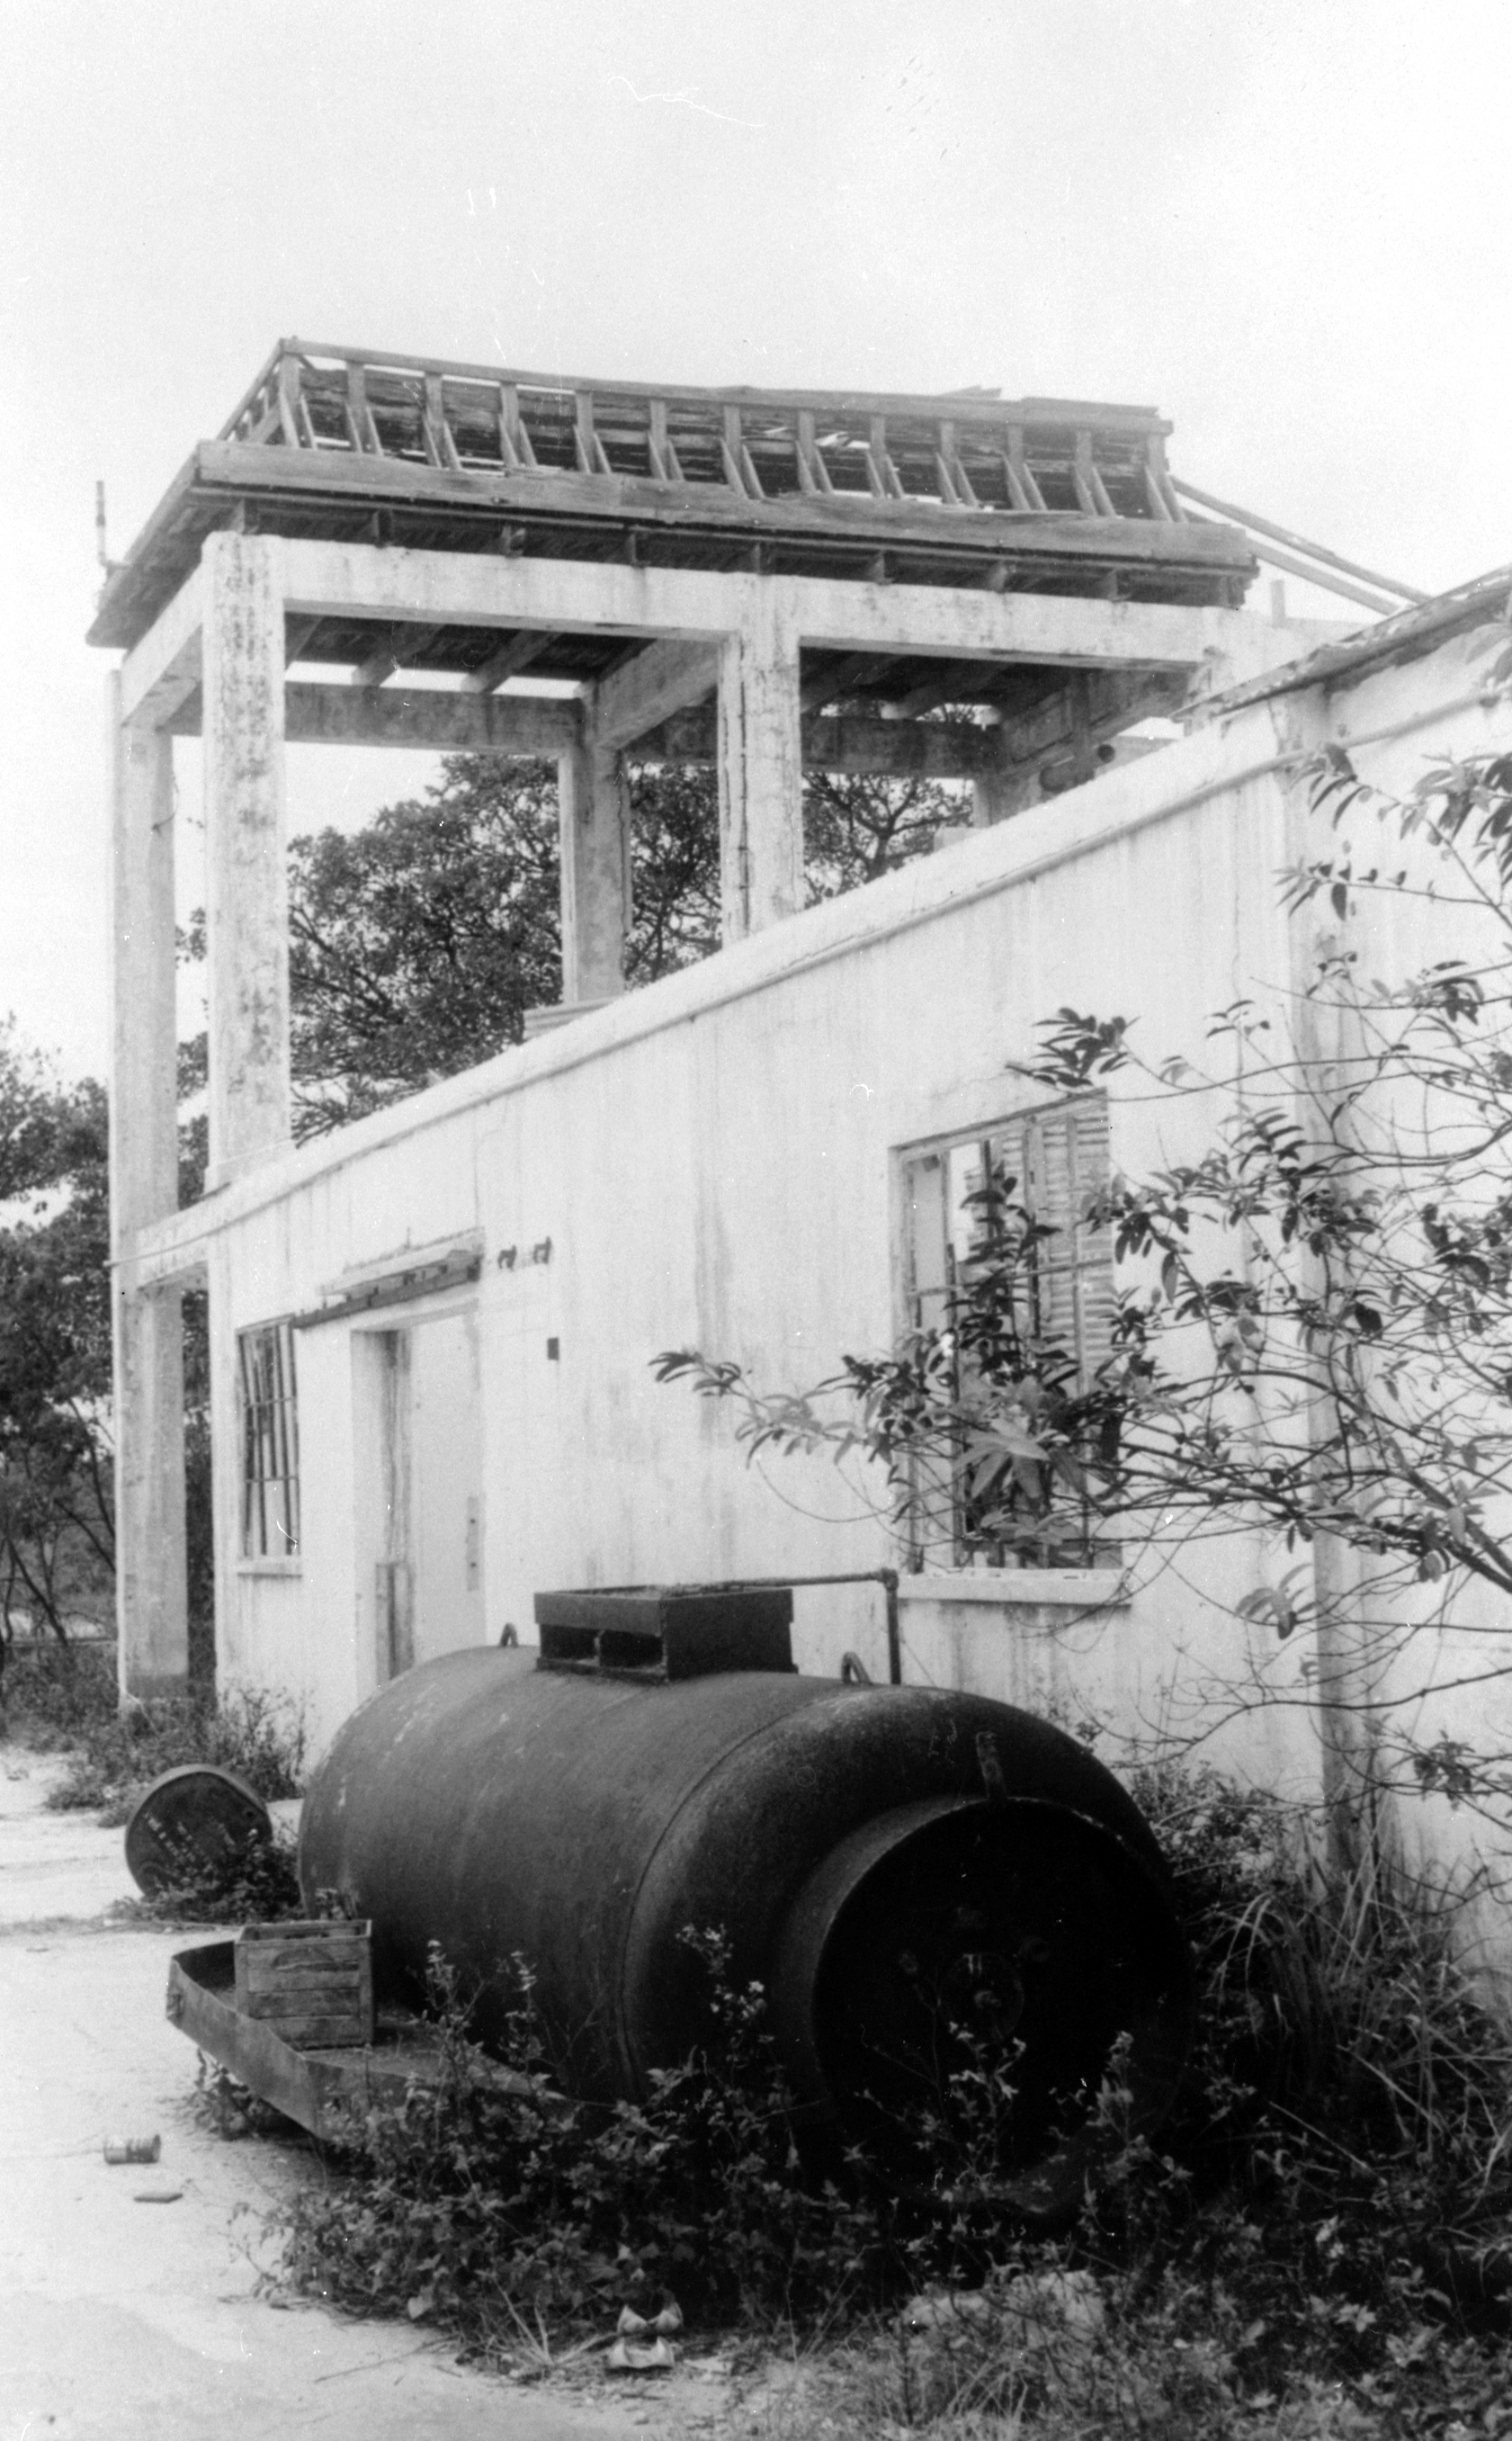 Remains of crawfish canning business, 1940's